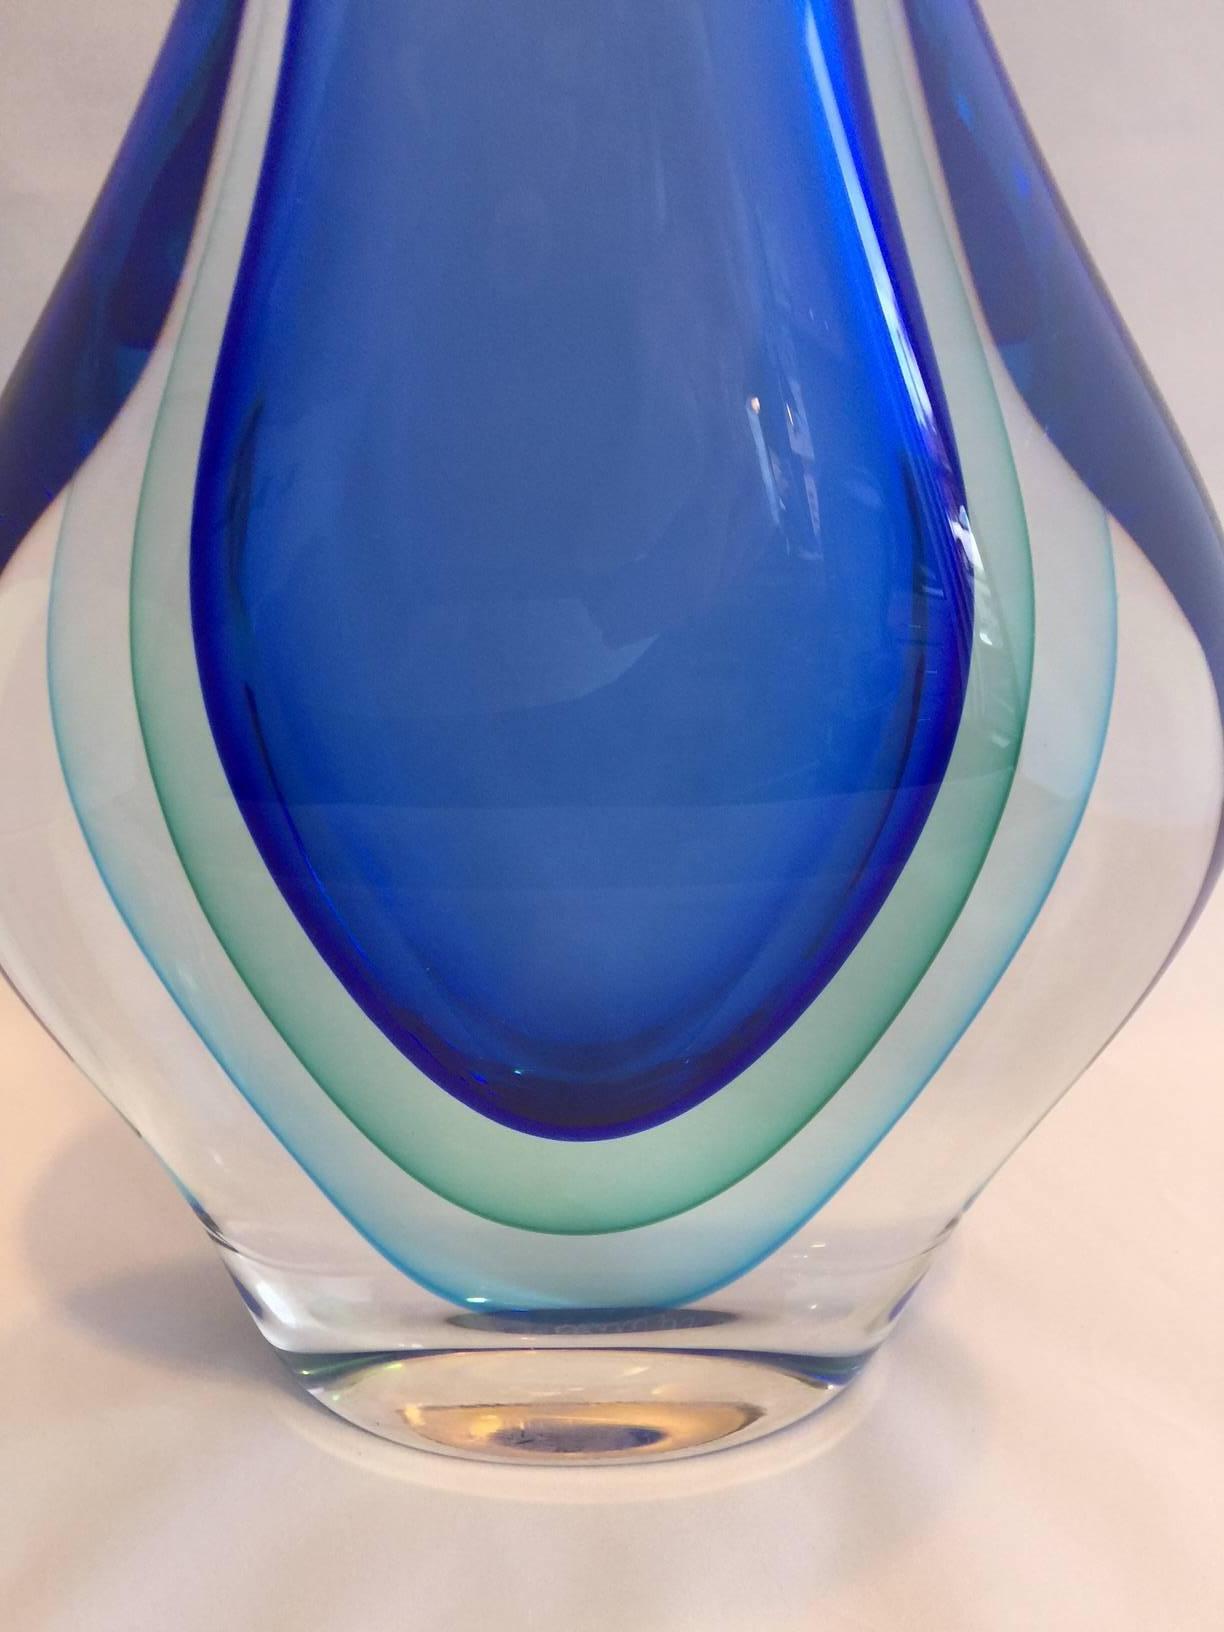 Hand-Crafted Gorgeous Murano Glass Multi Sommerso Decanter by Murano Artist Luigi Onesto